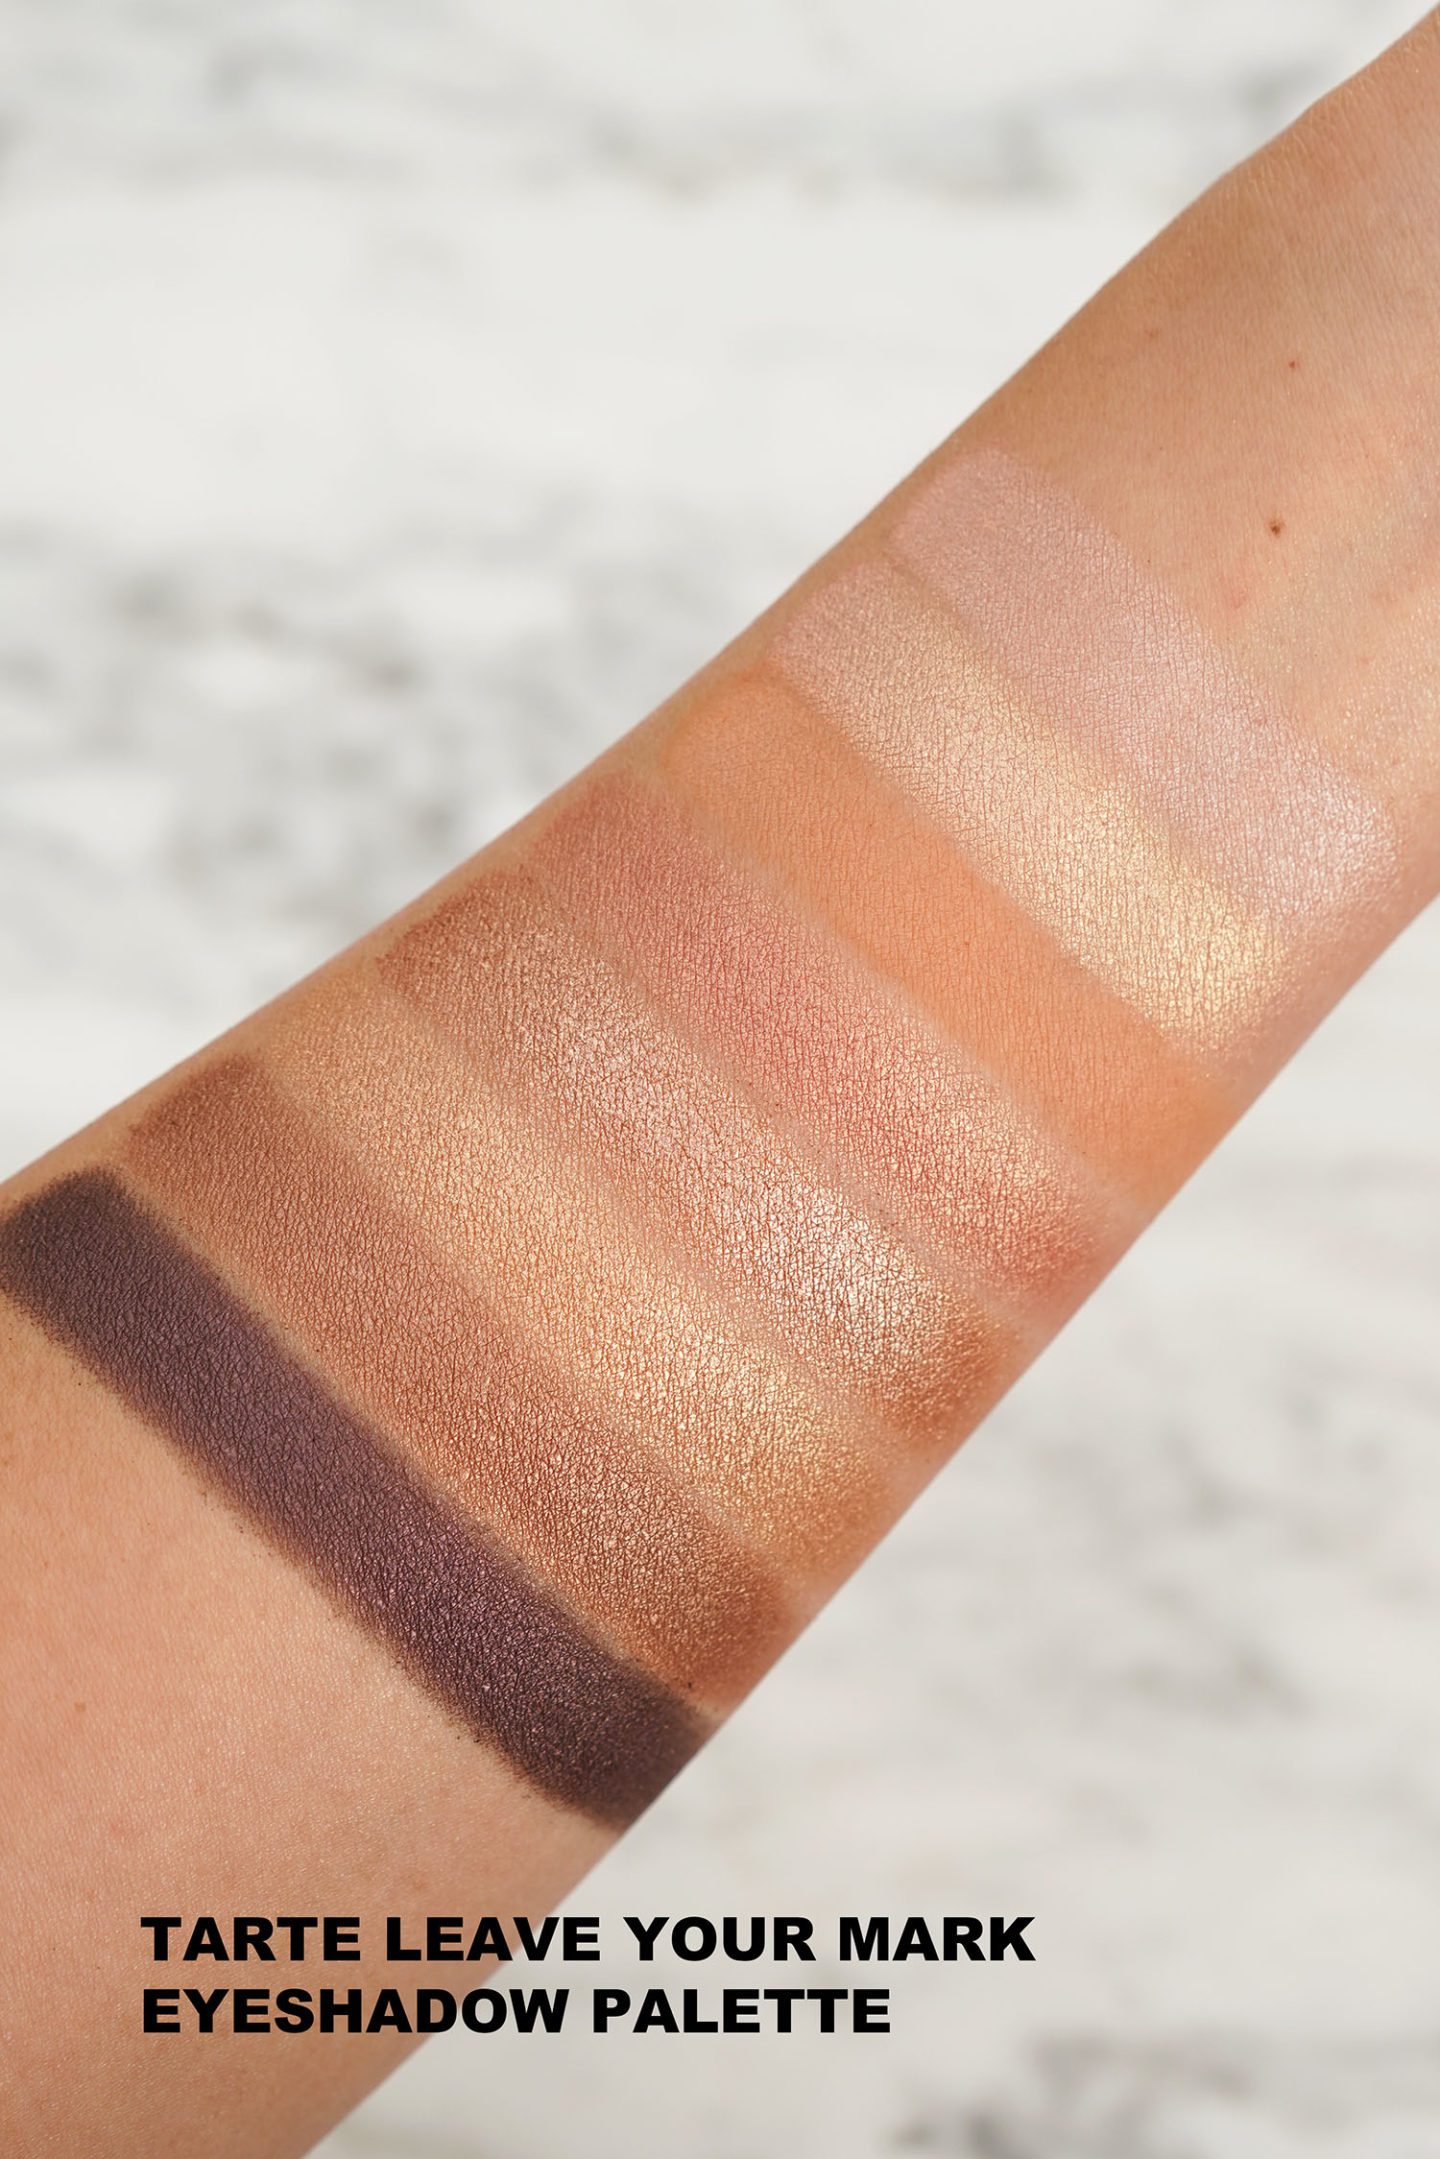 Tarte Leave Your Mark Palette swatches